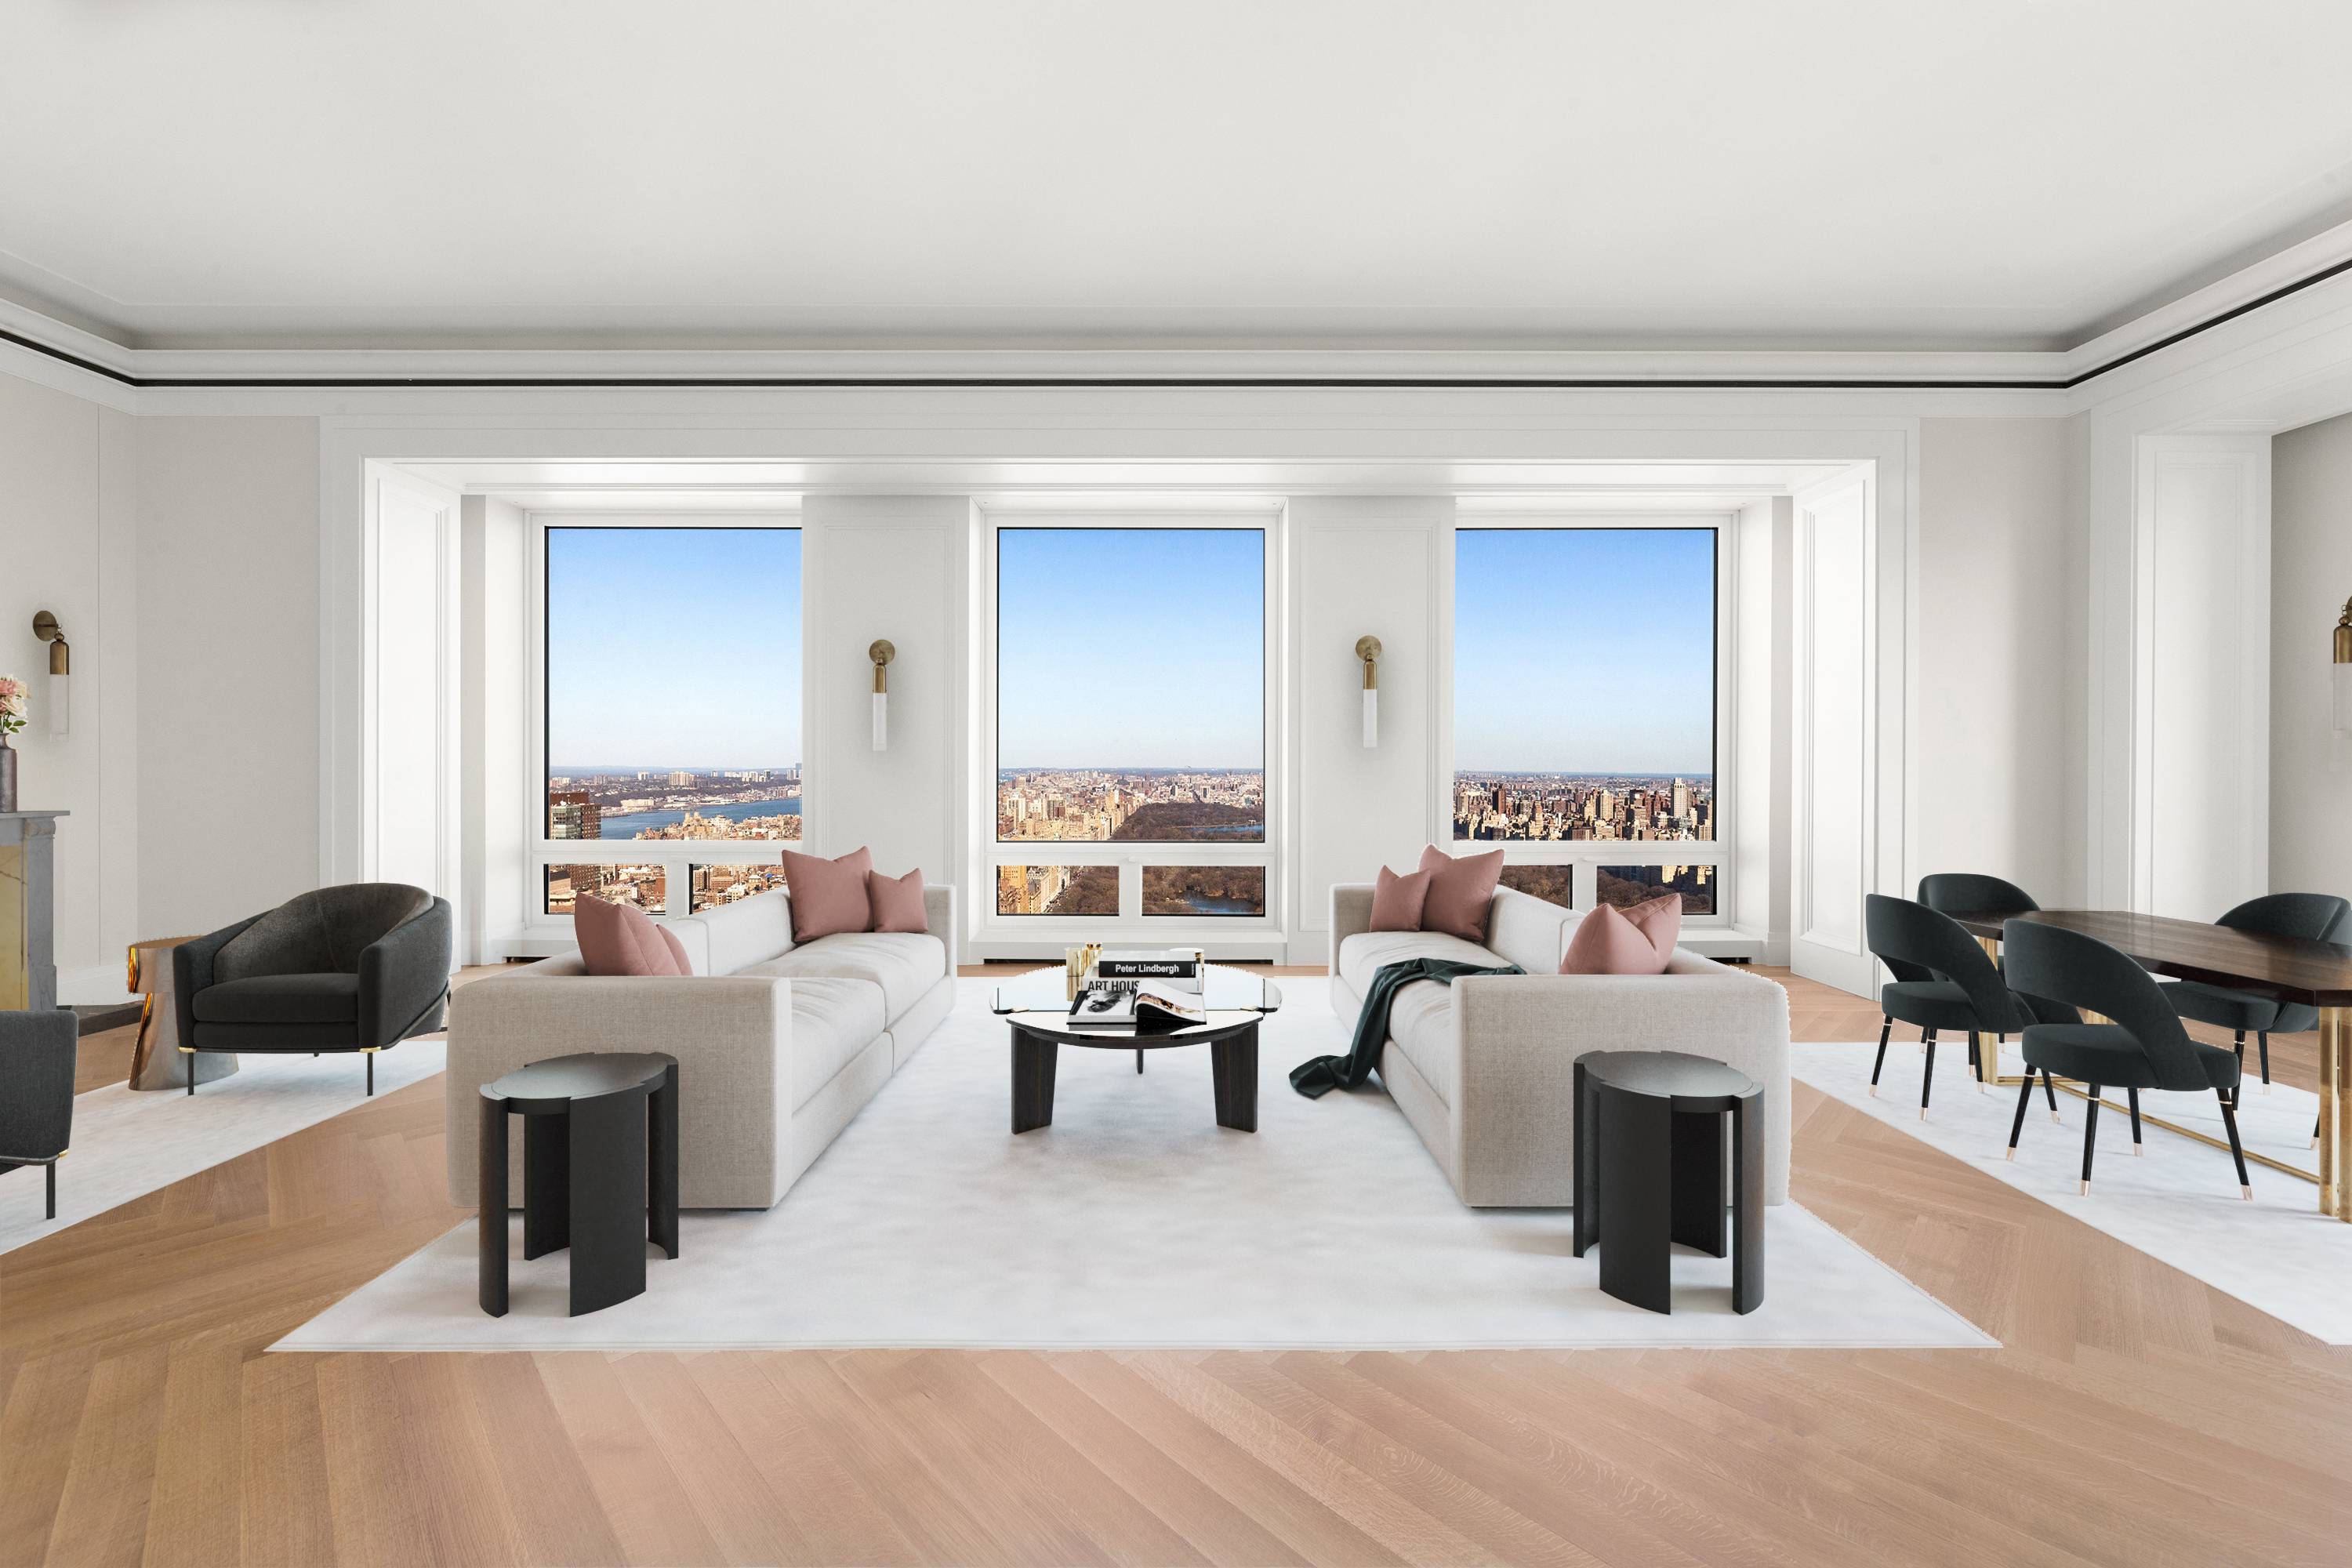 220 CENTRAL PARK SOUTH  | CENTRAL PARK RUNWAY VIEWS  | COVETED HALF FLOOR BEAUTY